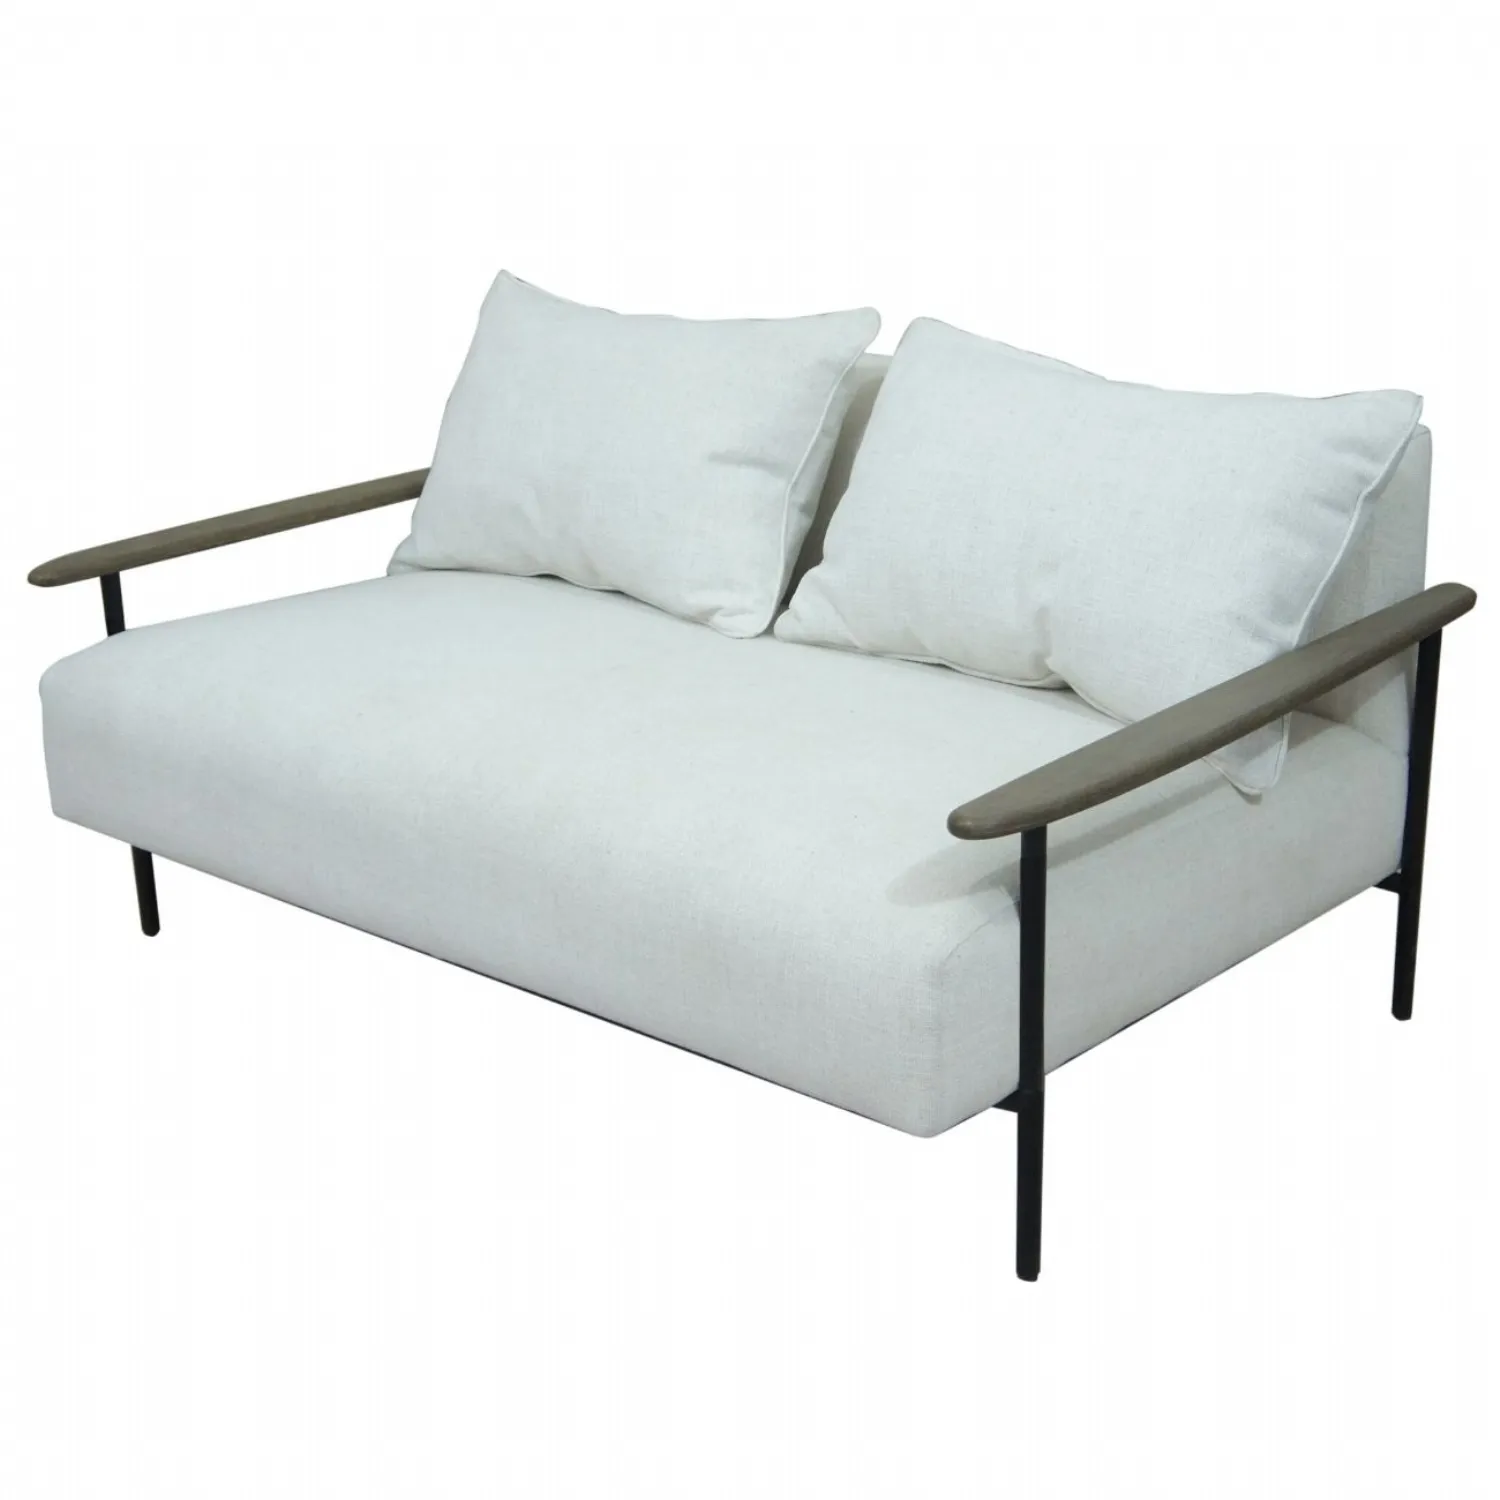 Pale Grey Two Seater Sofa With Wooden Arms and Steel Frame